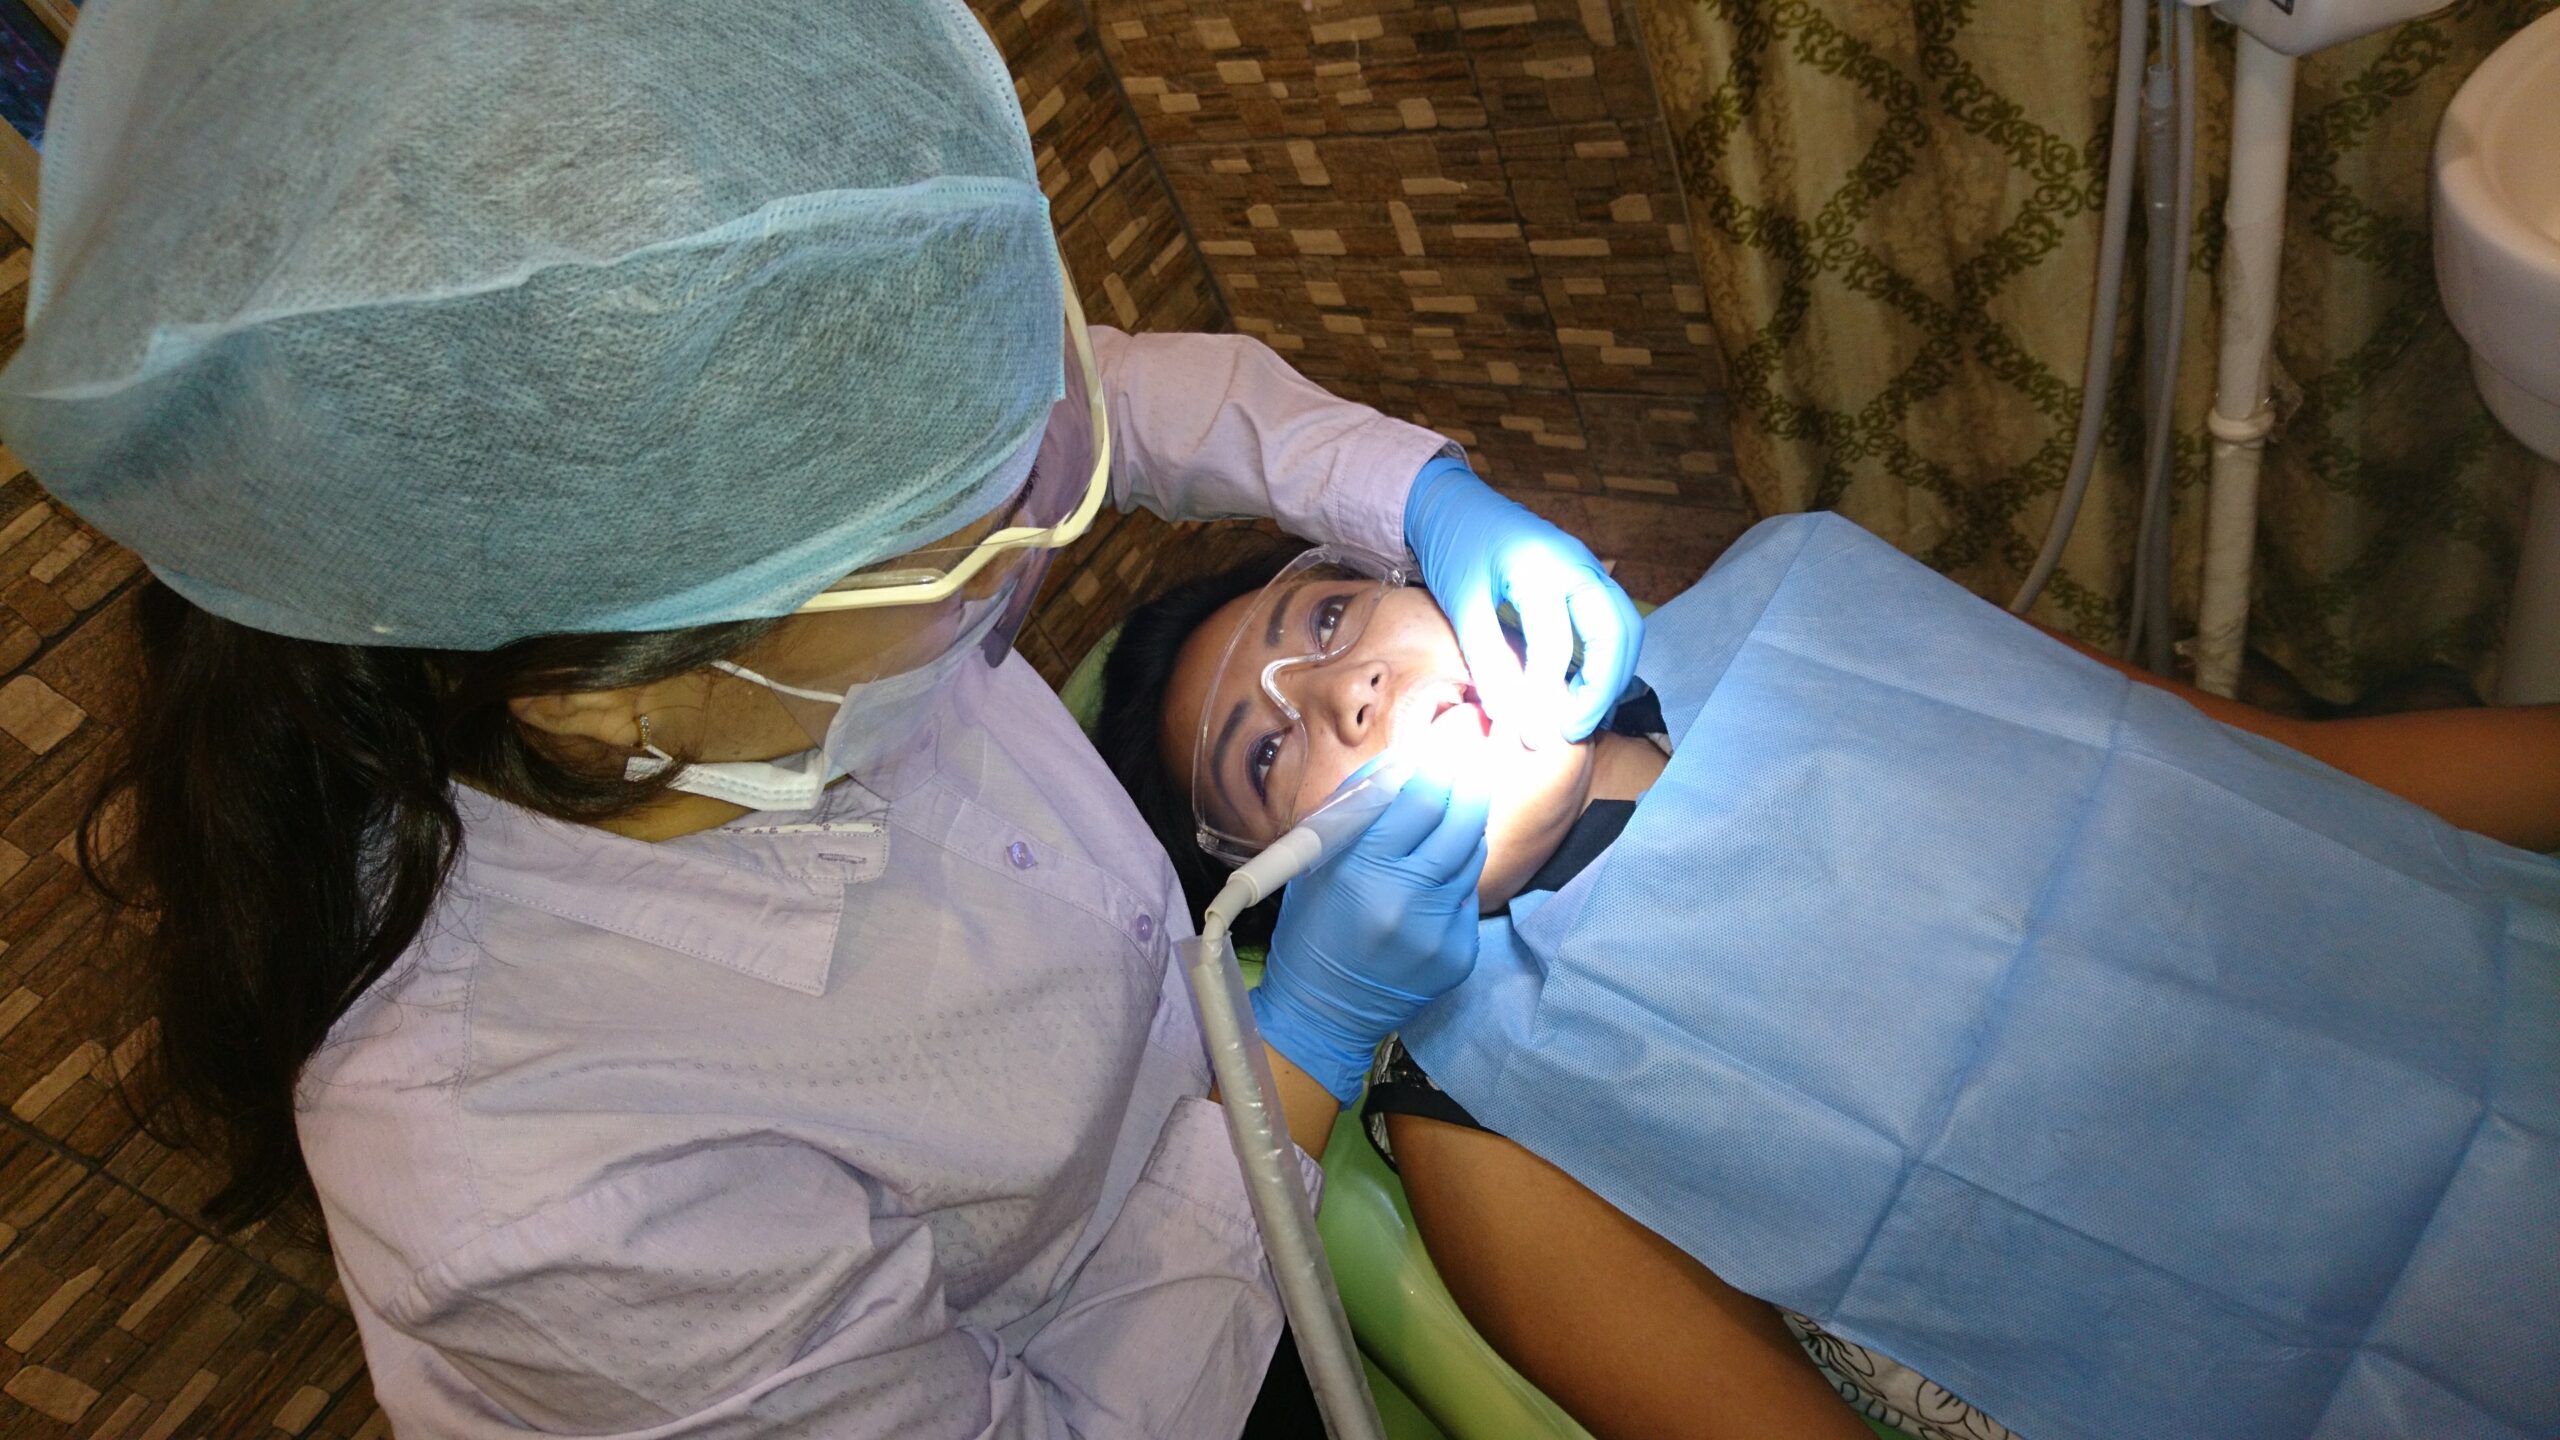 How to envision a Charitable Dental Initiative